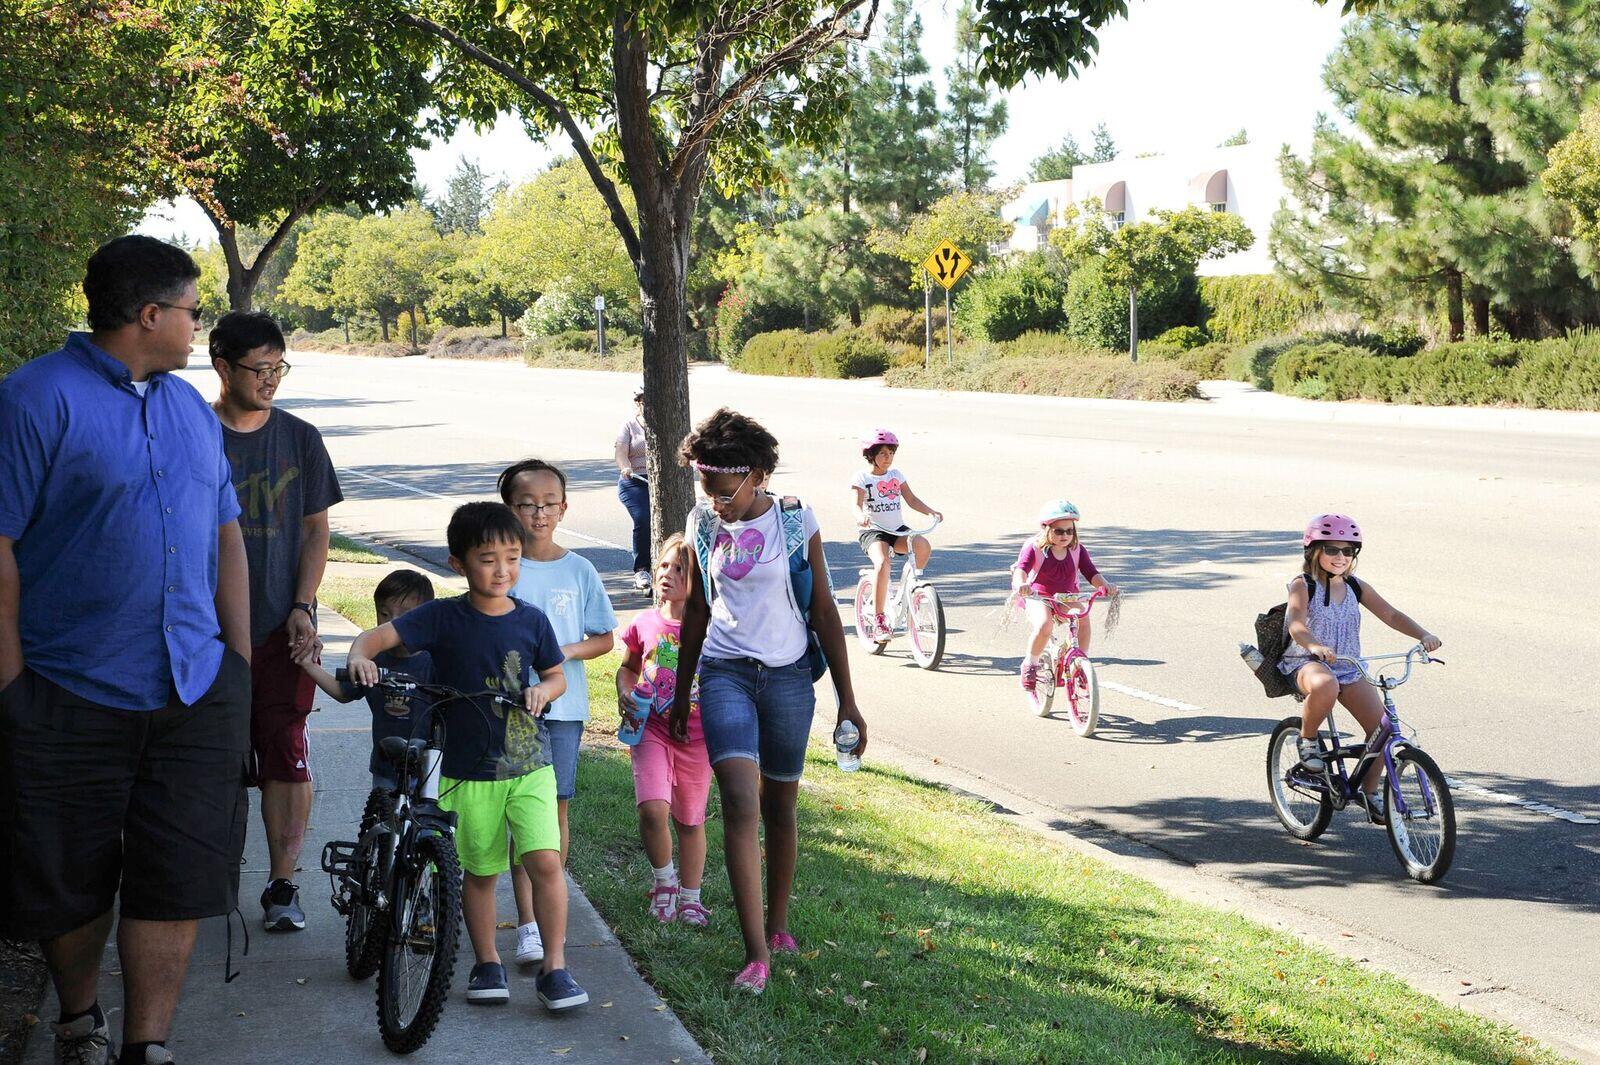 Children and parents walk and bike to school, with some on the sidewalk and others on the road.